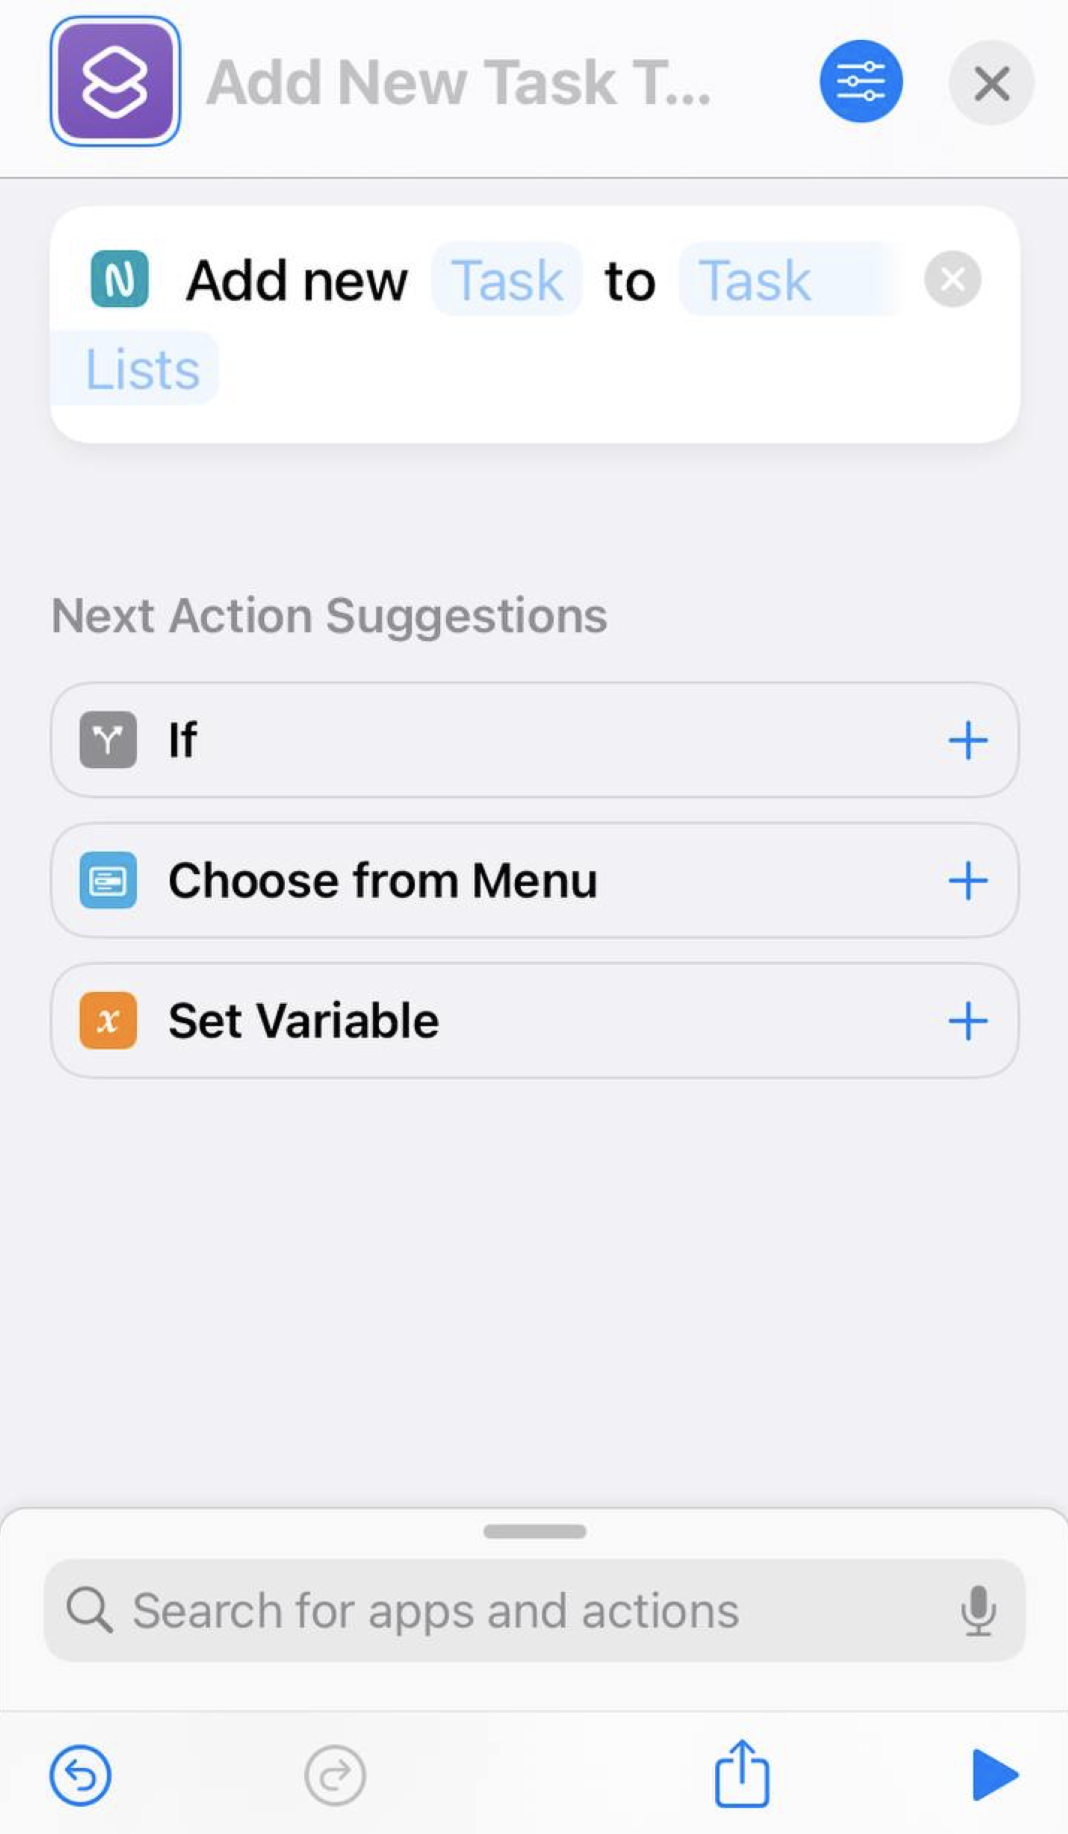 Nimbus Note for iOS allows you to quickly execute a specific action using shortcuts.